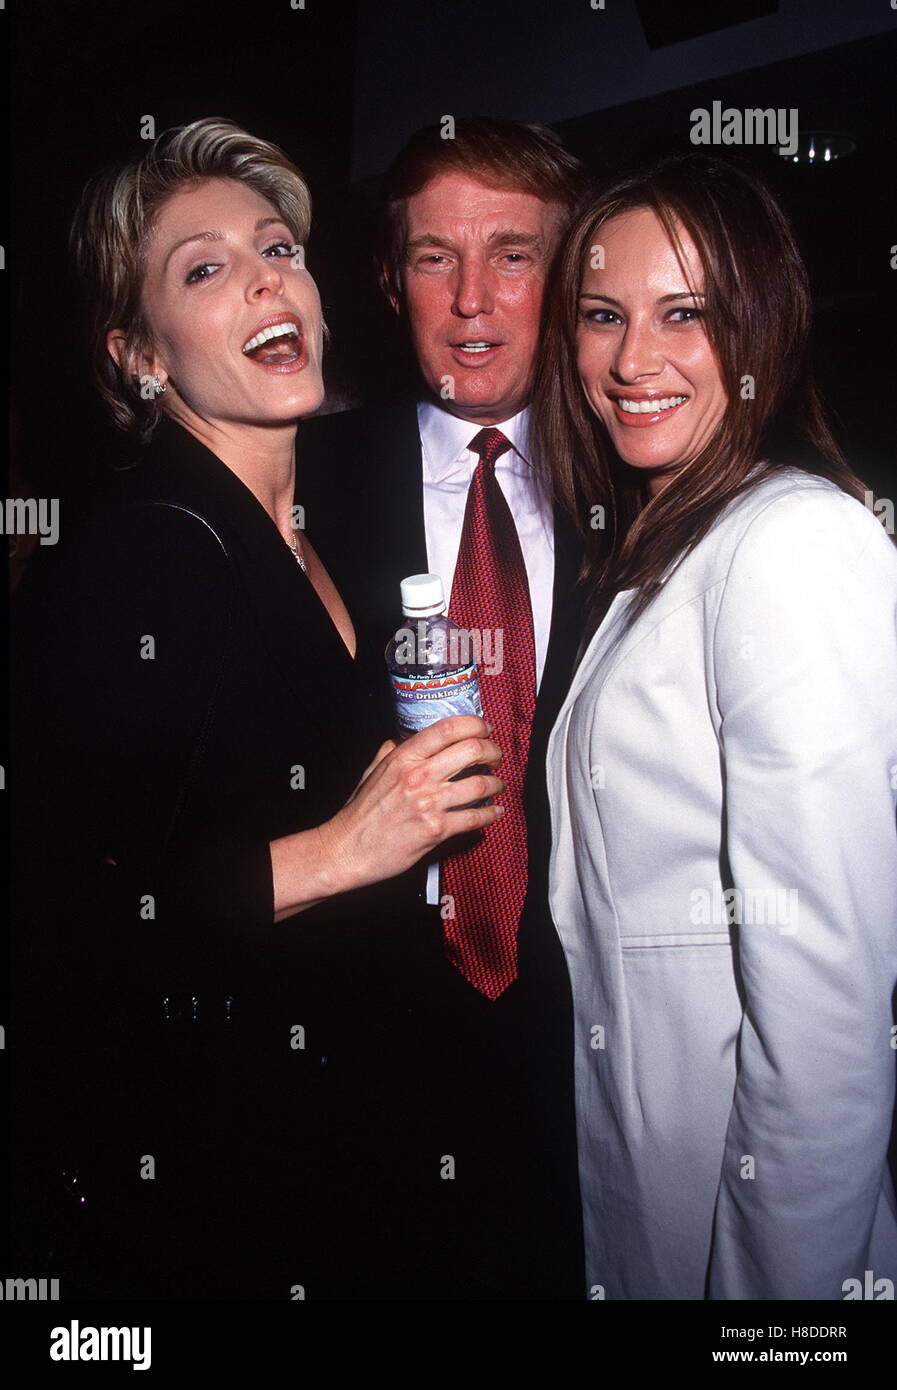 Marla Maples Donald Trump High Resolution Stock Photography and Images -  Alamy